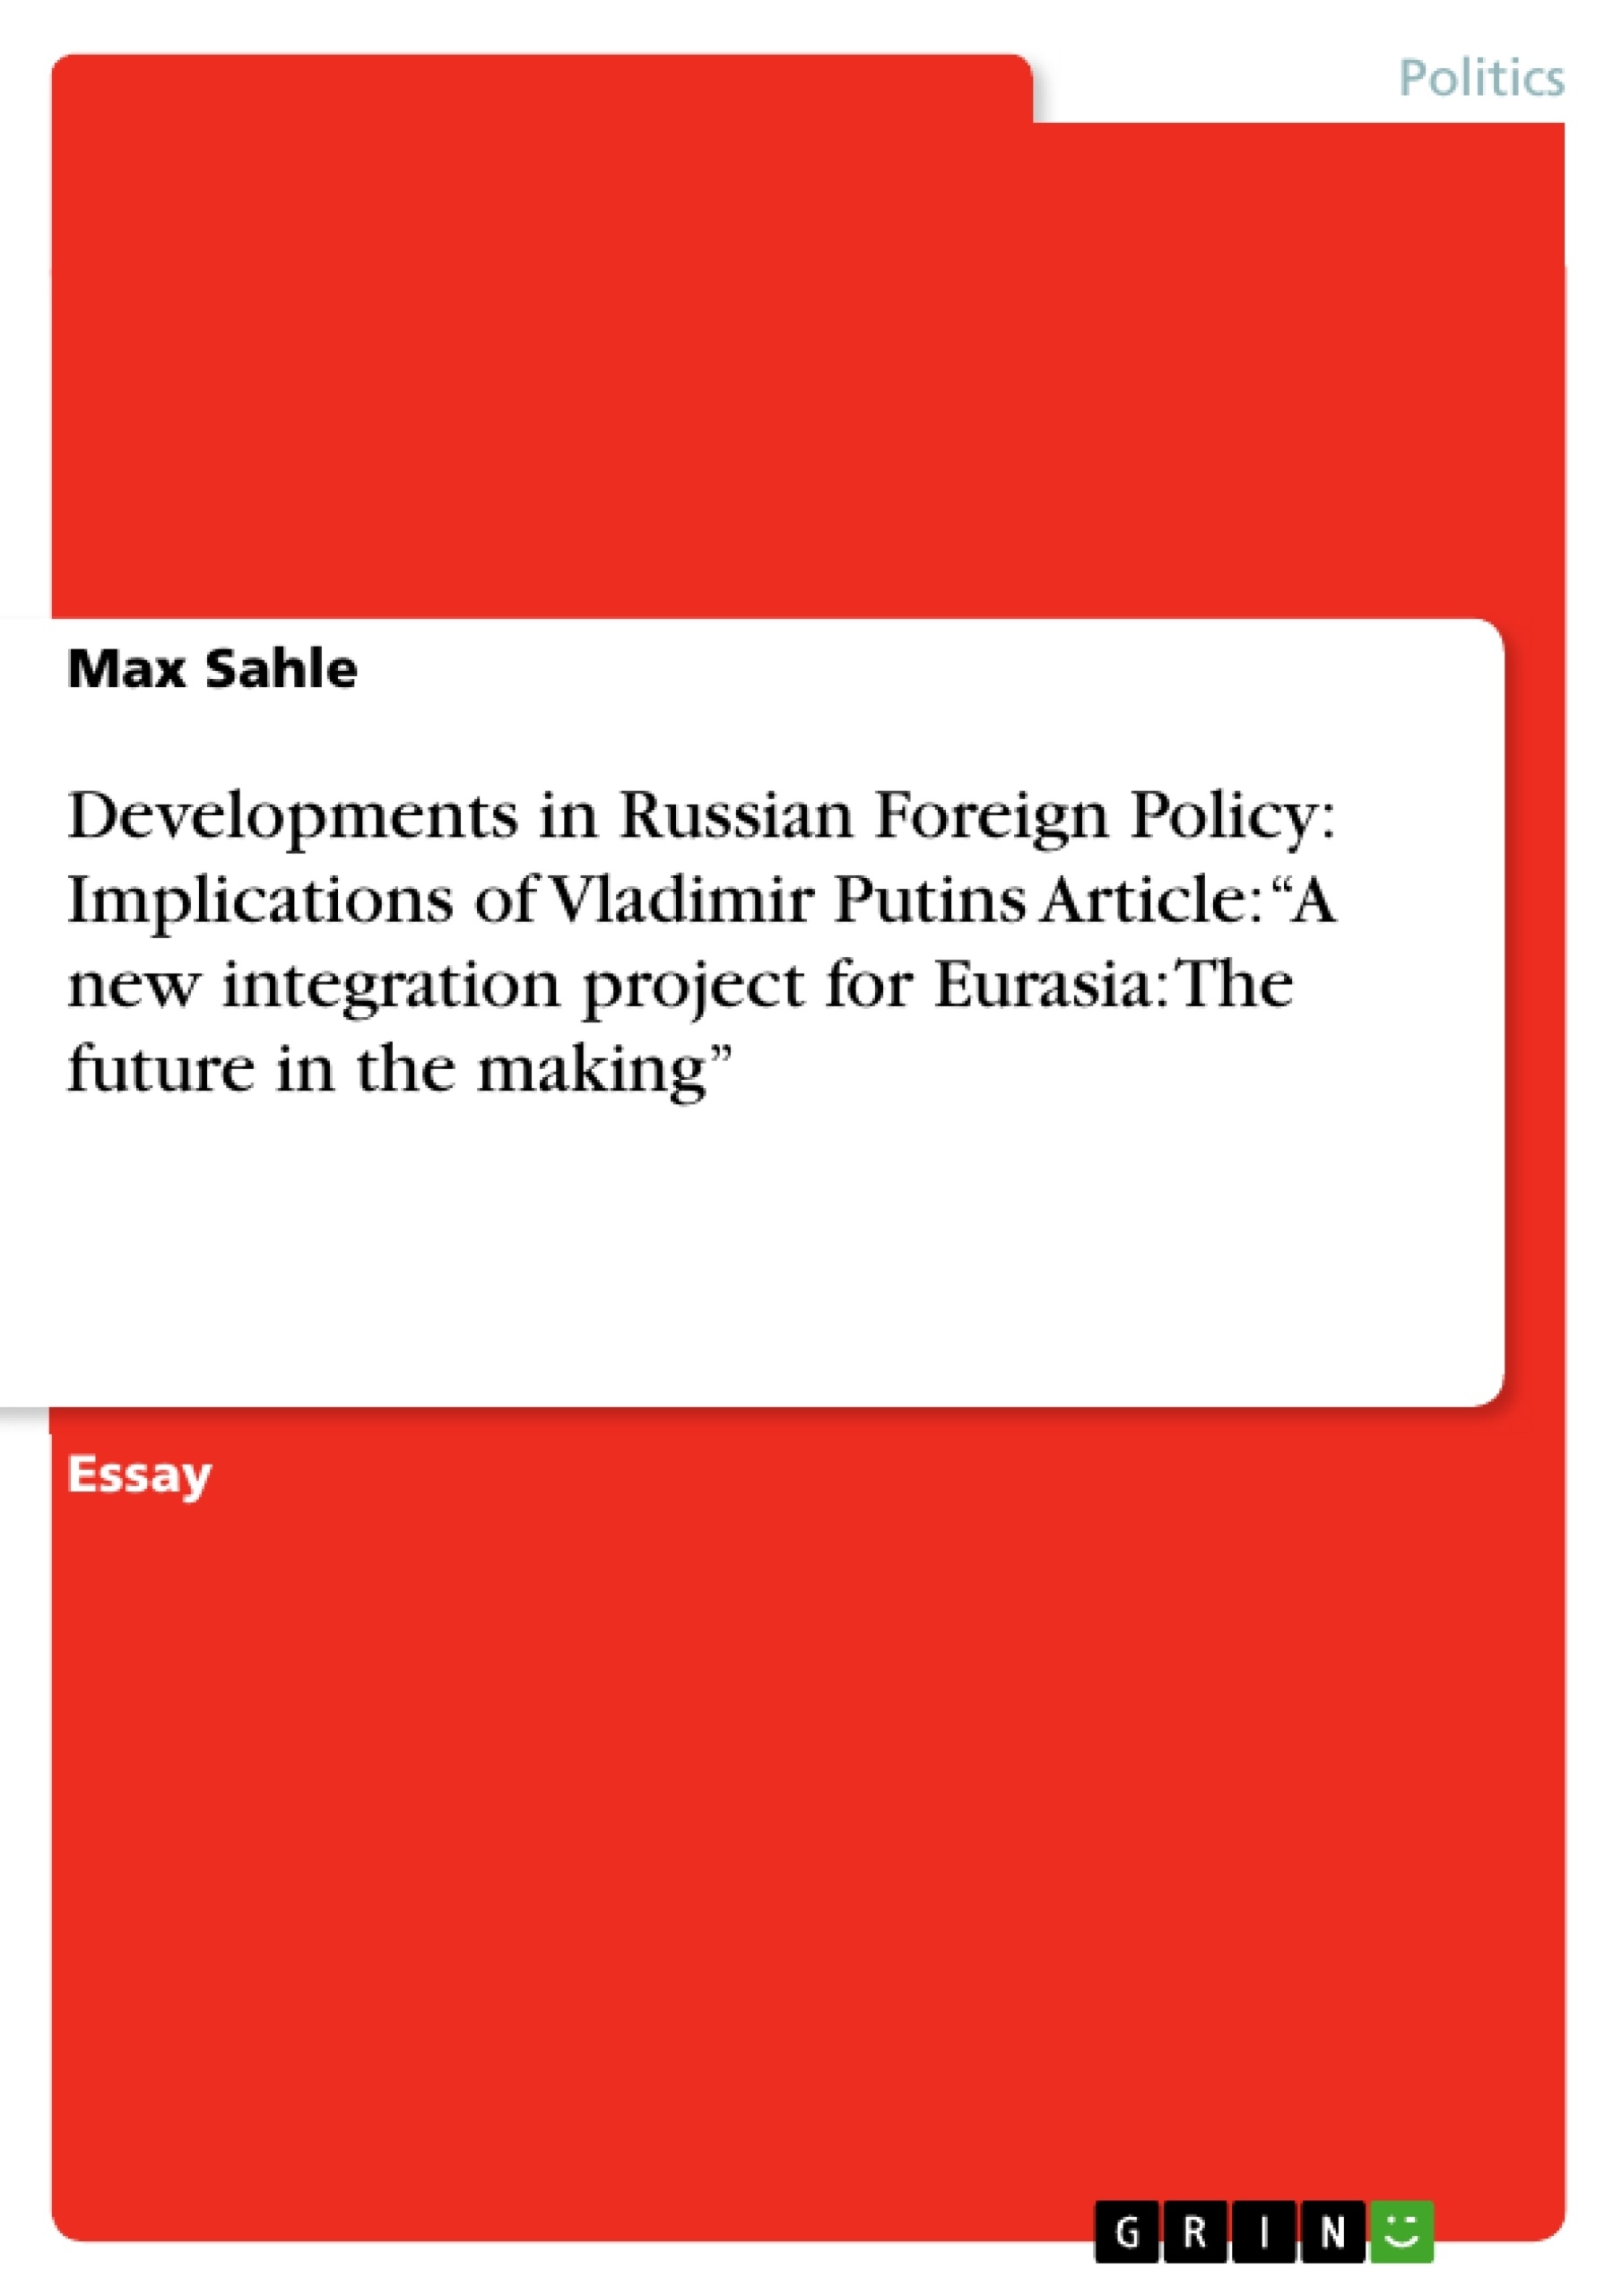 Título: Developments in Russian Foreign Policy: Implications of Vladimir Putins Article: “A new integration project for Eurasia: The future in the making”